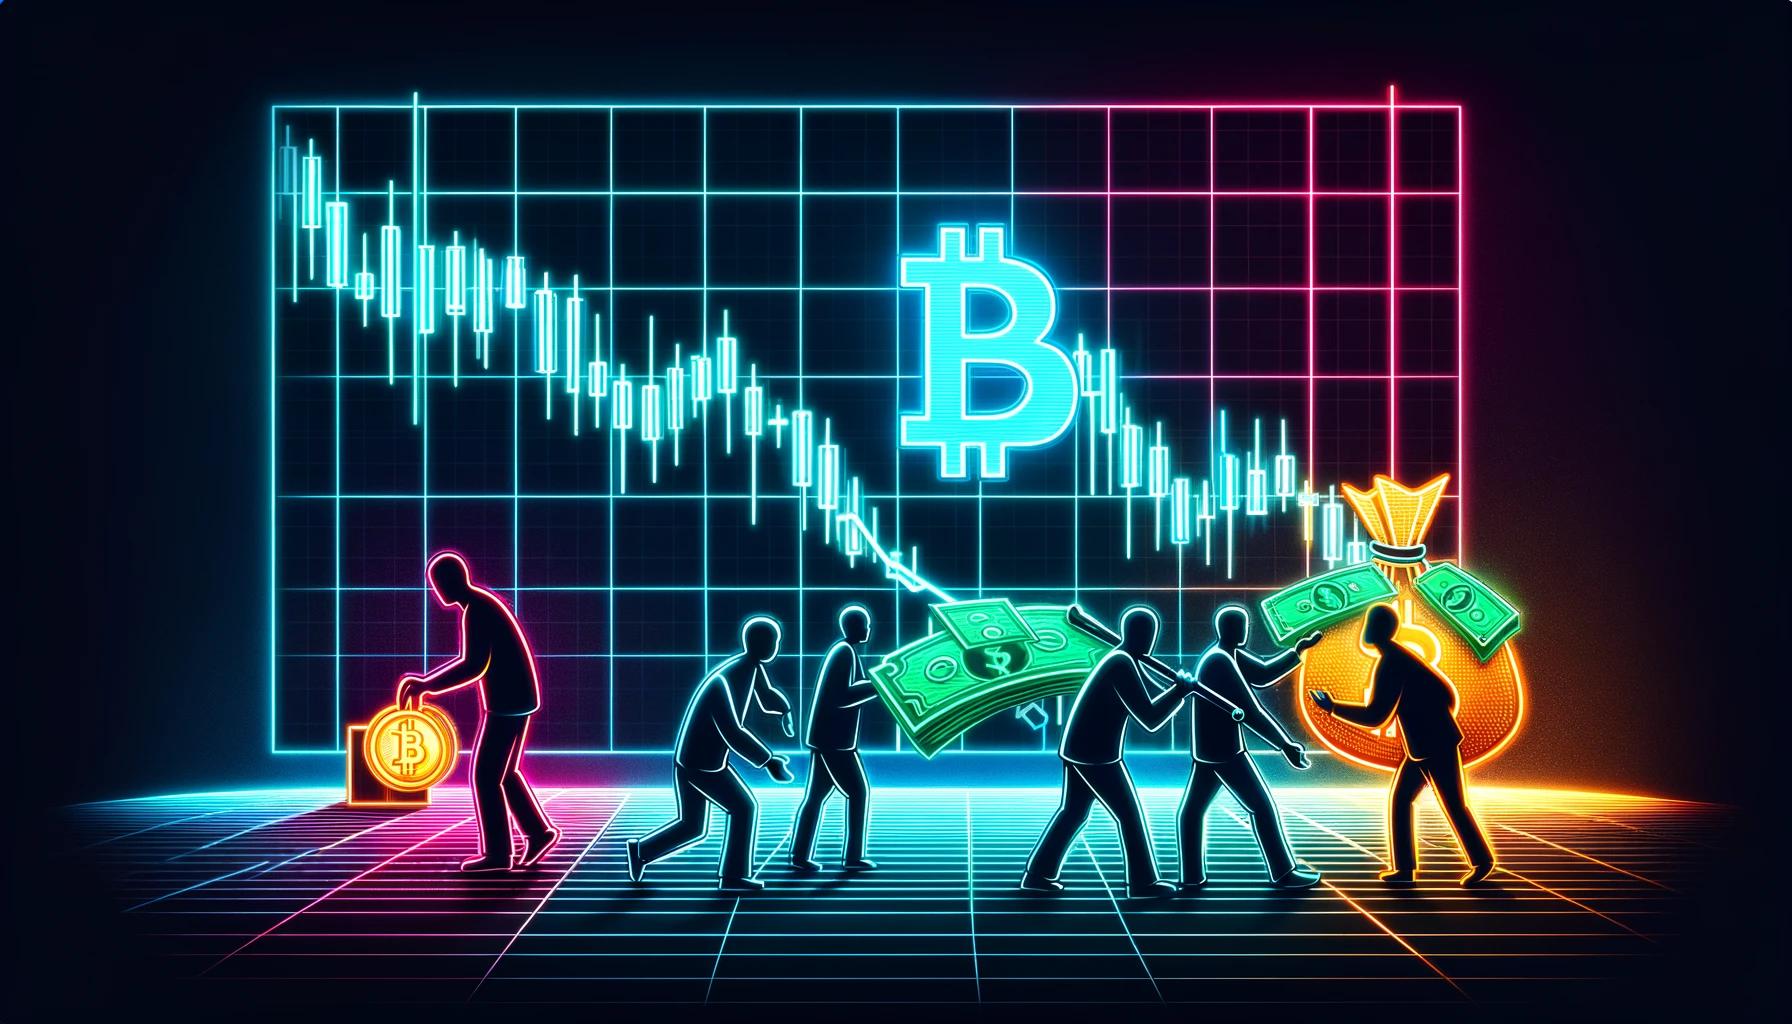 Spot Bitcoin ETFs Suffer Worst Week Yet With $890 Million In Outflows - The Defiant